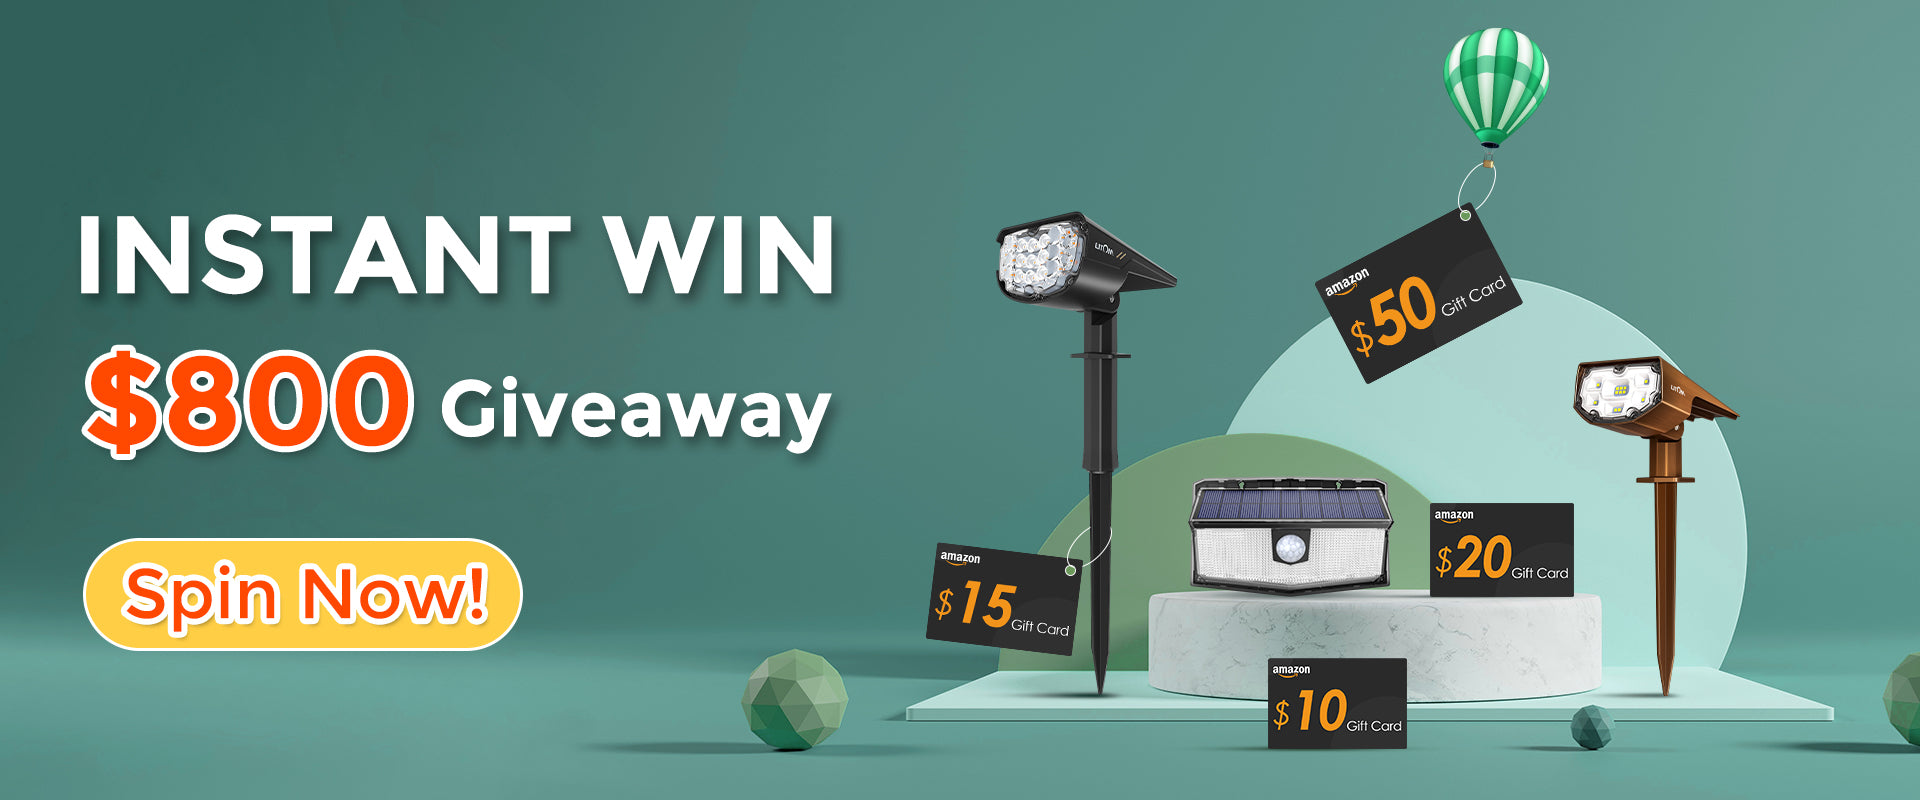 online contests, sweepstakes and giveaways - june-giveaway